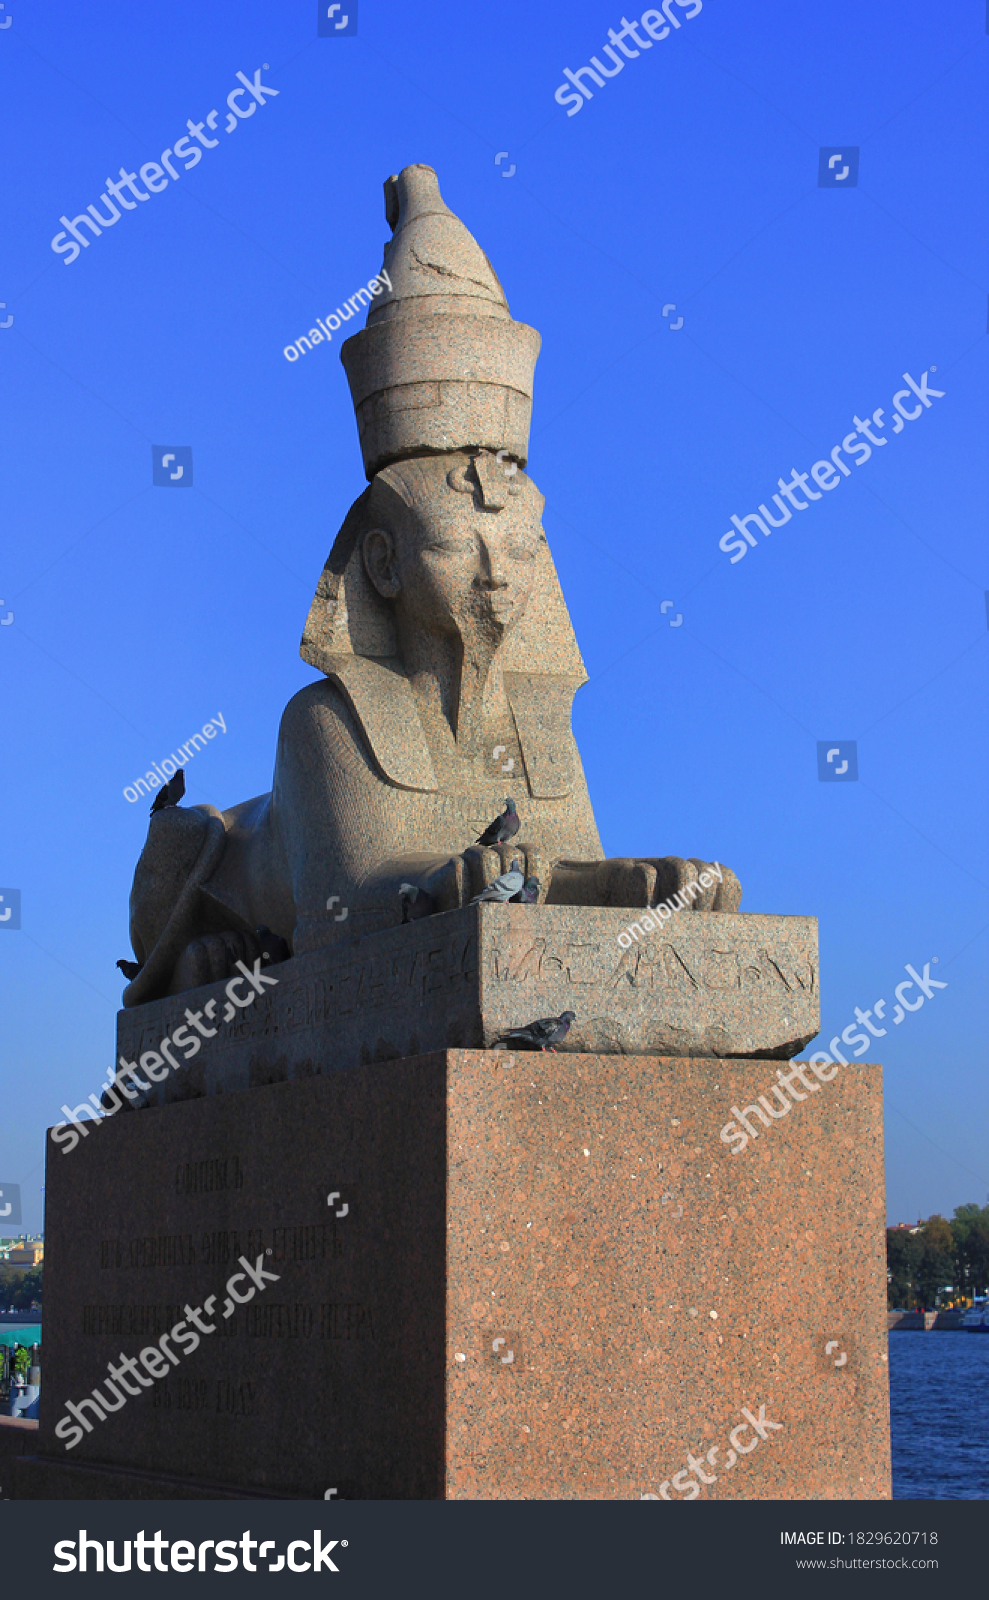 Ancient egyptian sphinx statue on quay with sphinxes at the Neva river embankment in St Petersburg, Russia. Historic old granite sphinxes statue in St Petersburg city #1829620718